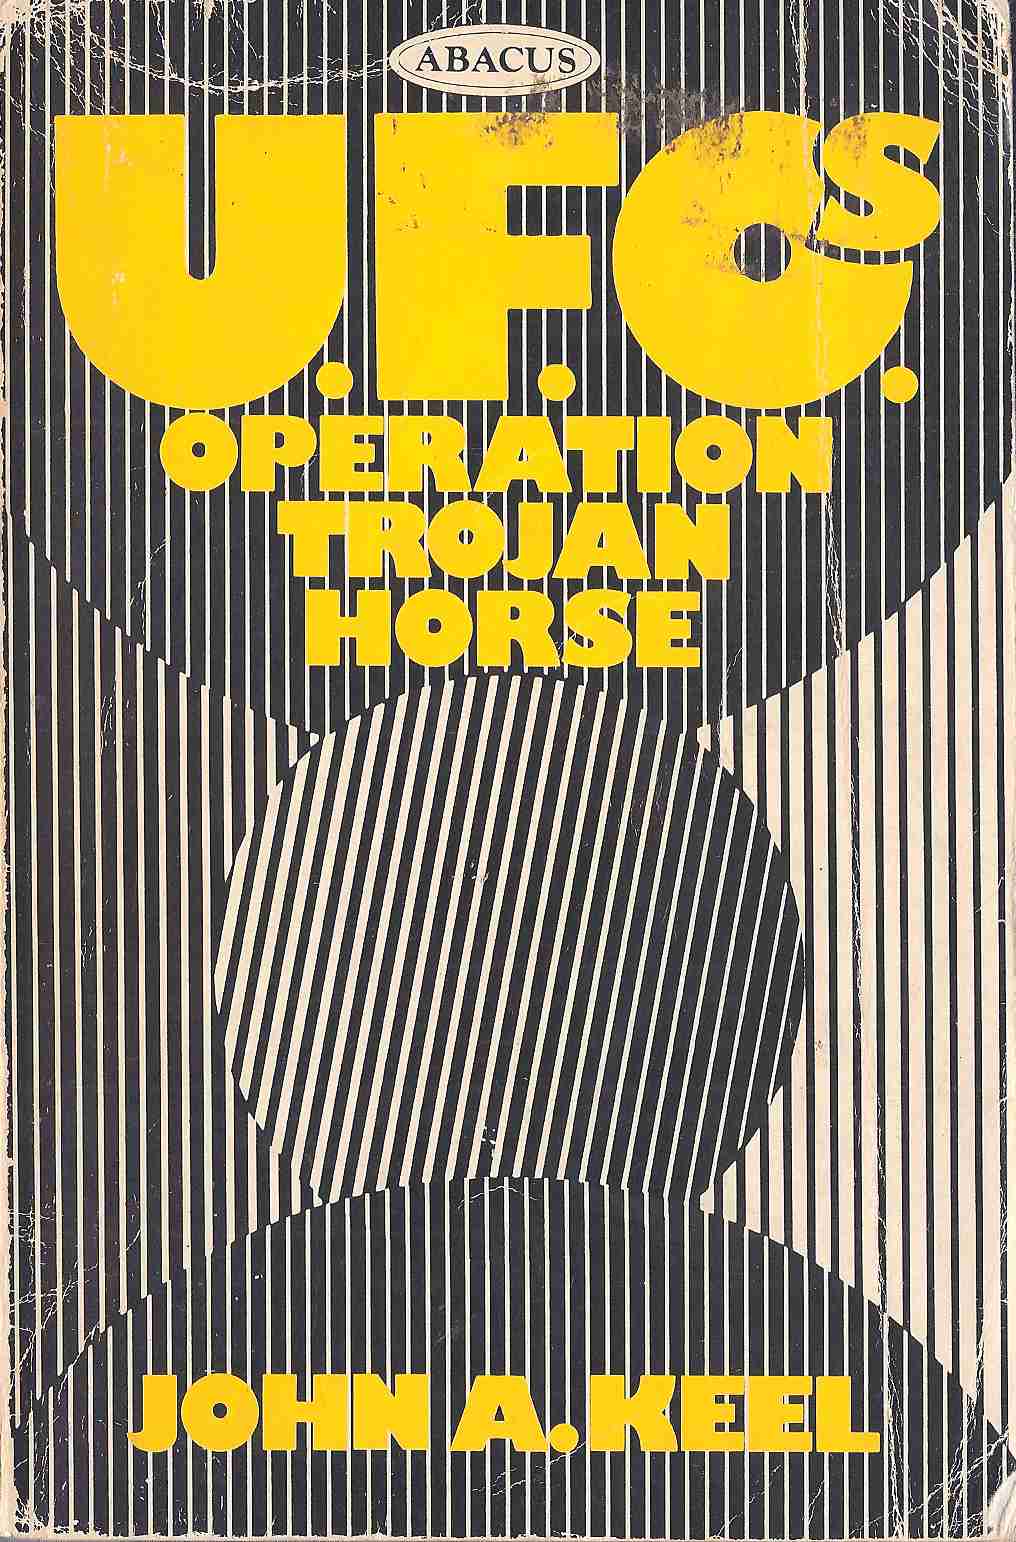 Image:John Keel: "UFOs Operation Trojan Horse" paperback cover design ABACUS 1973 edition